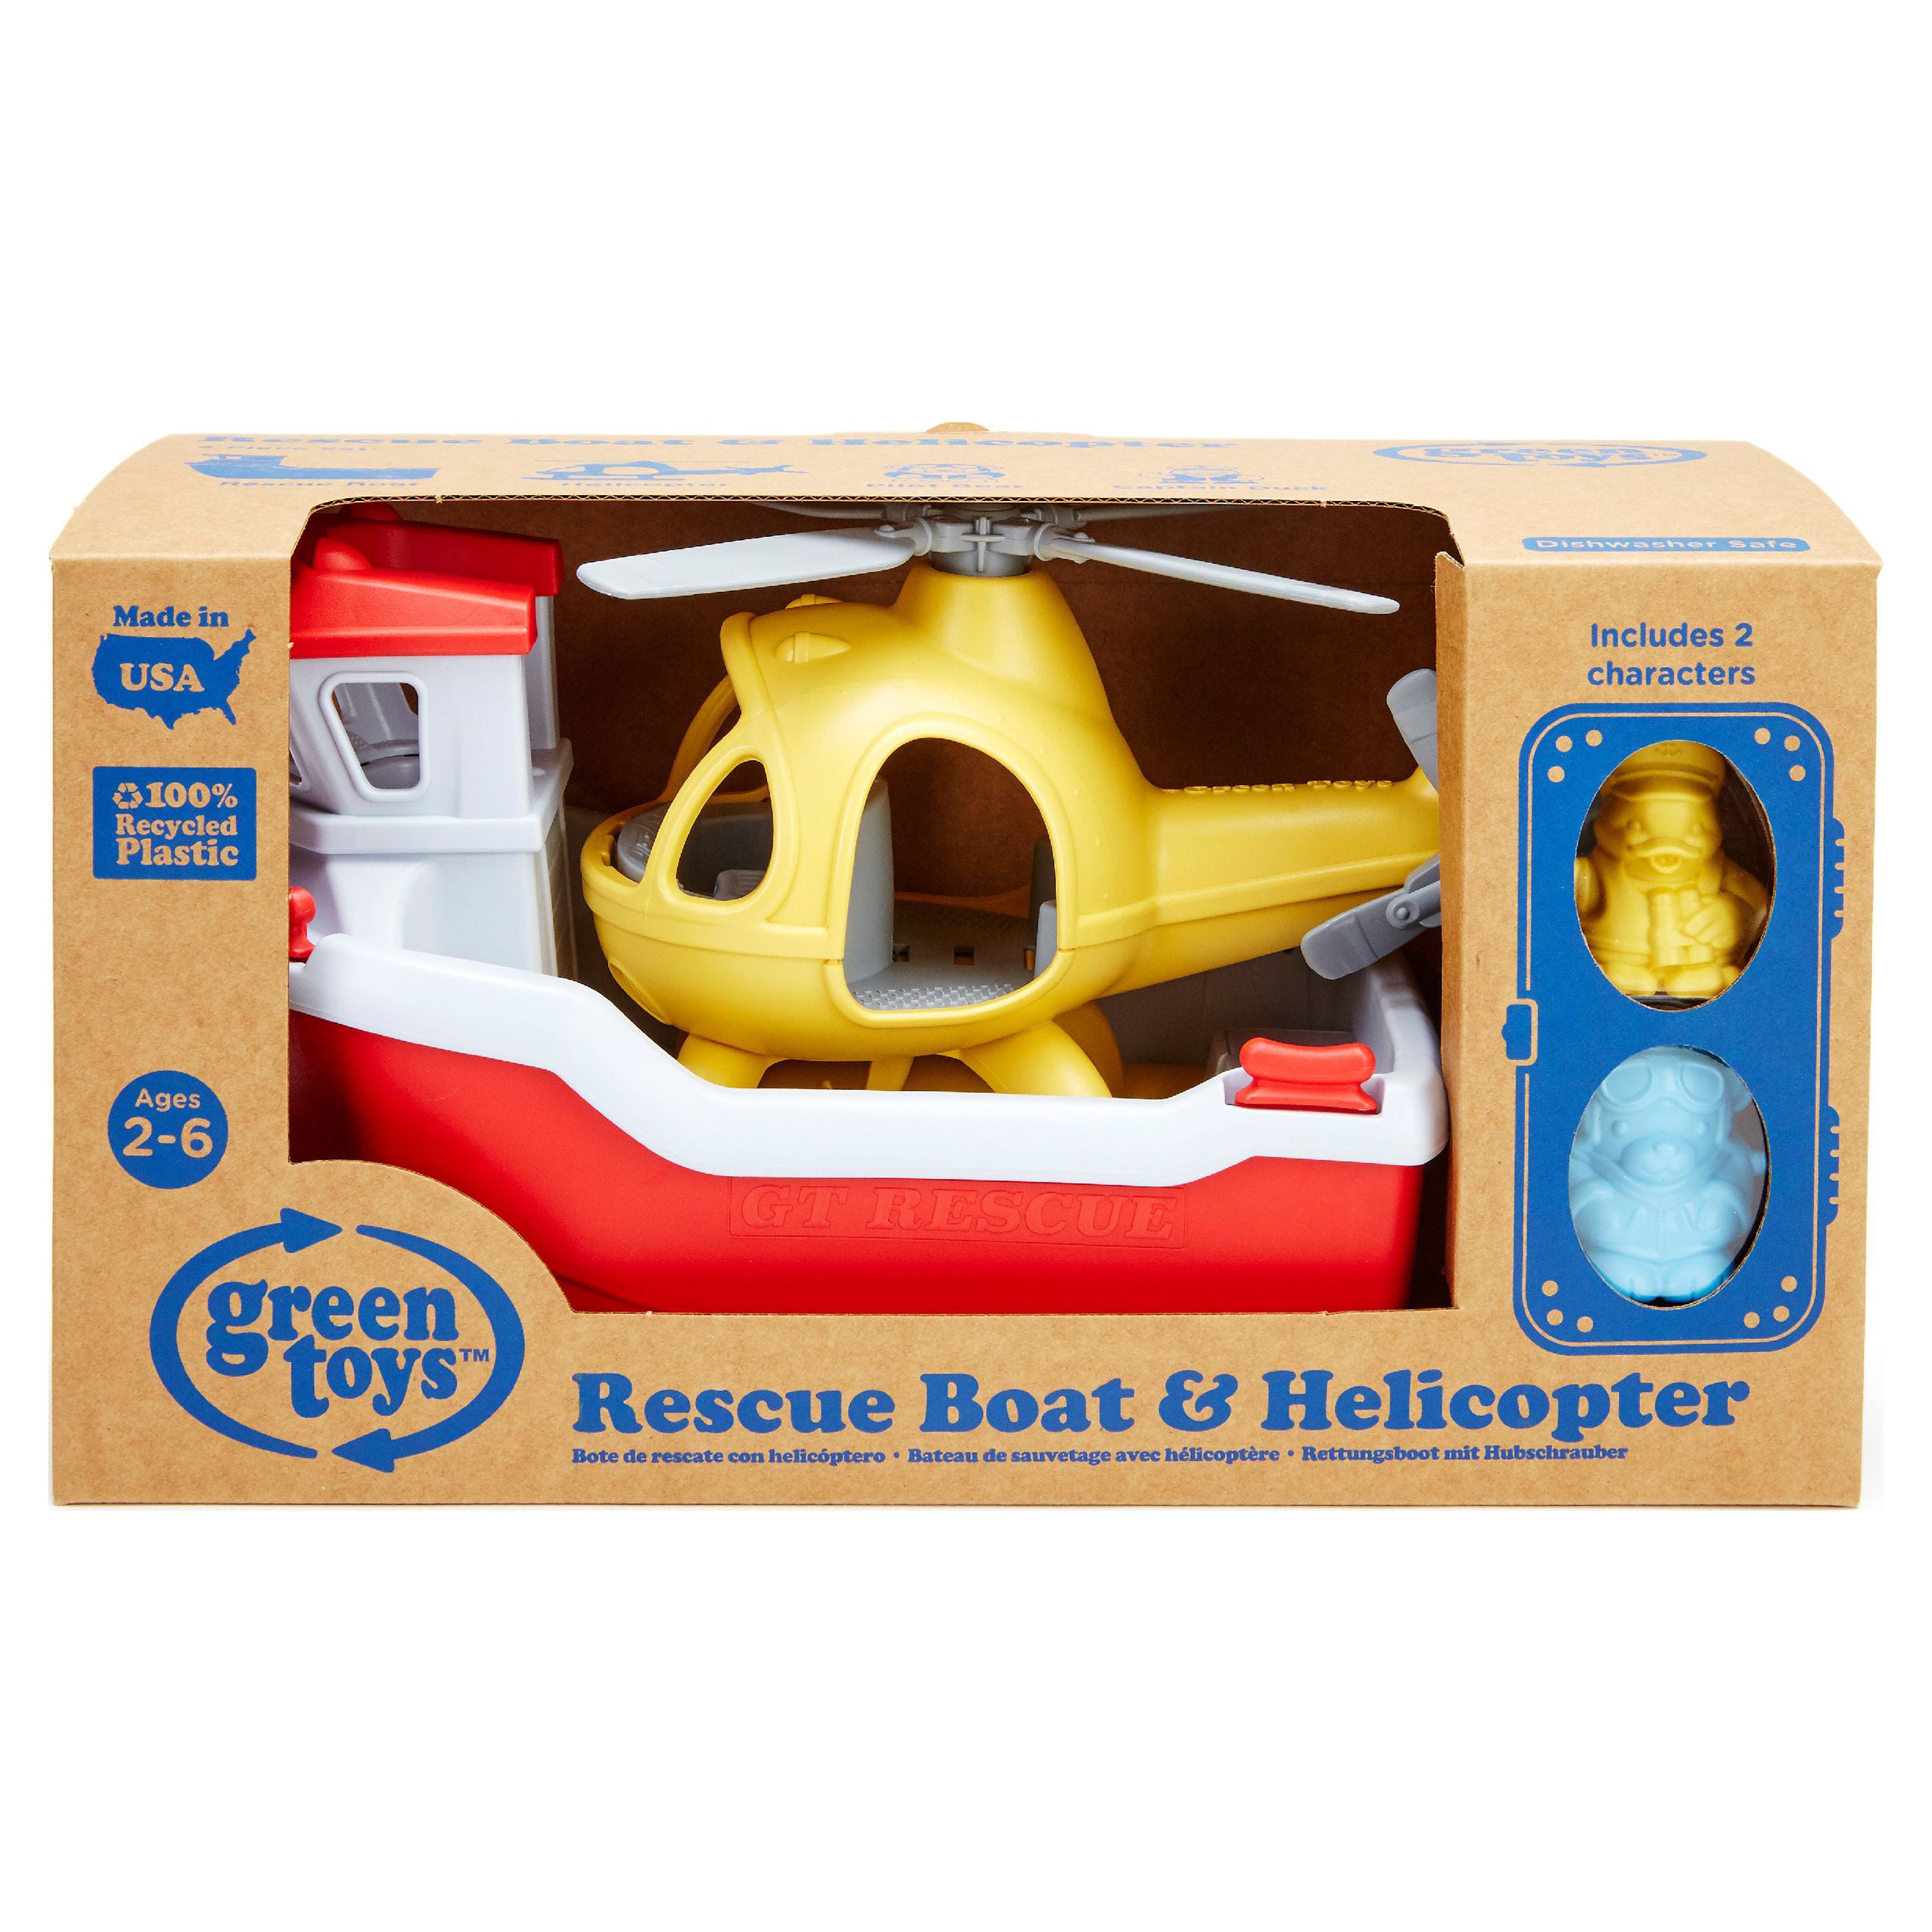 Green Toys Rescue Boat & Helicopter with a Captain Duck and Pilot Bear - image 2 of 10